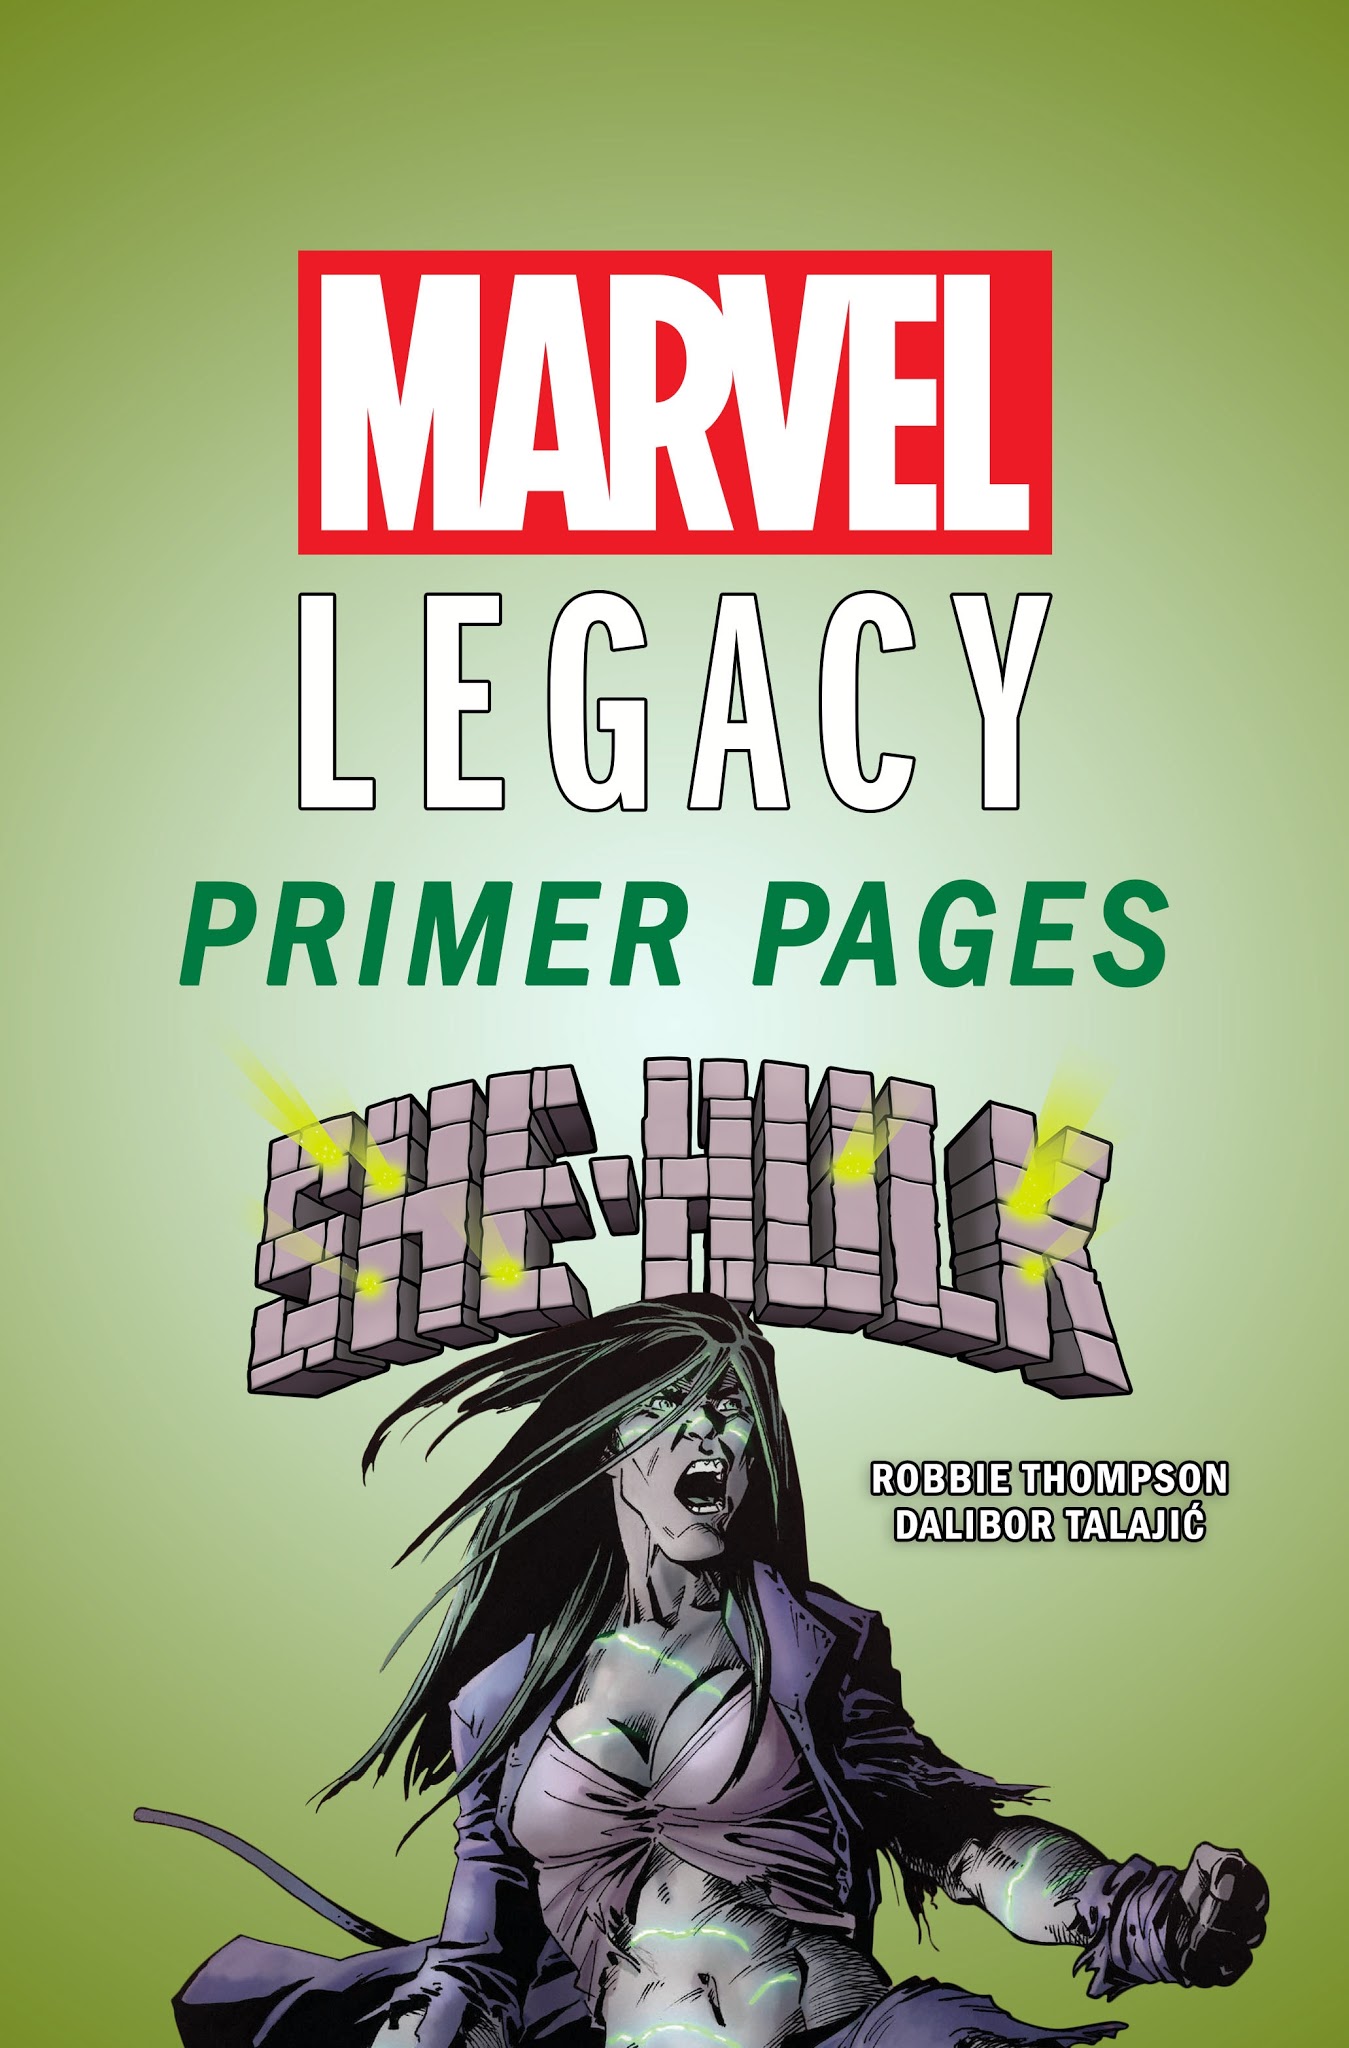 Read online Hulk (2016) comic -  Issue # Issue She-Hulk - Marvel Legacy Primer Pages - 1